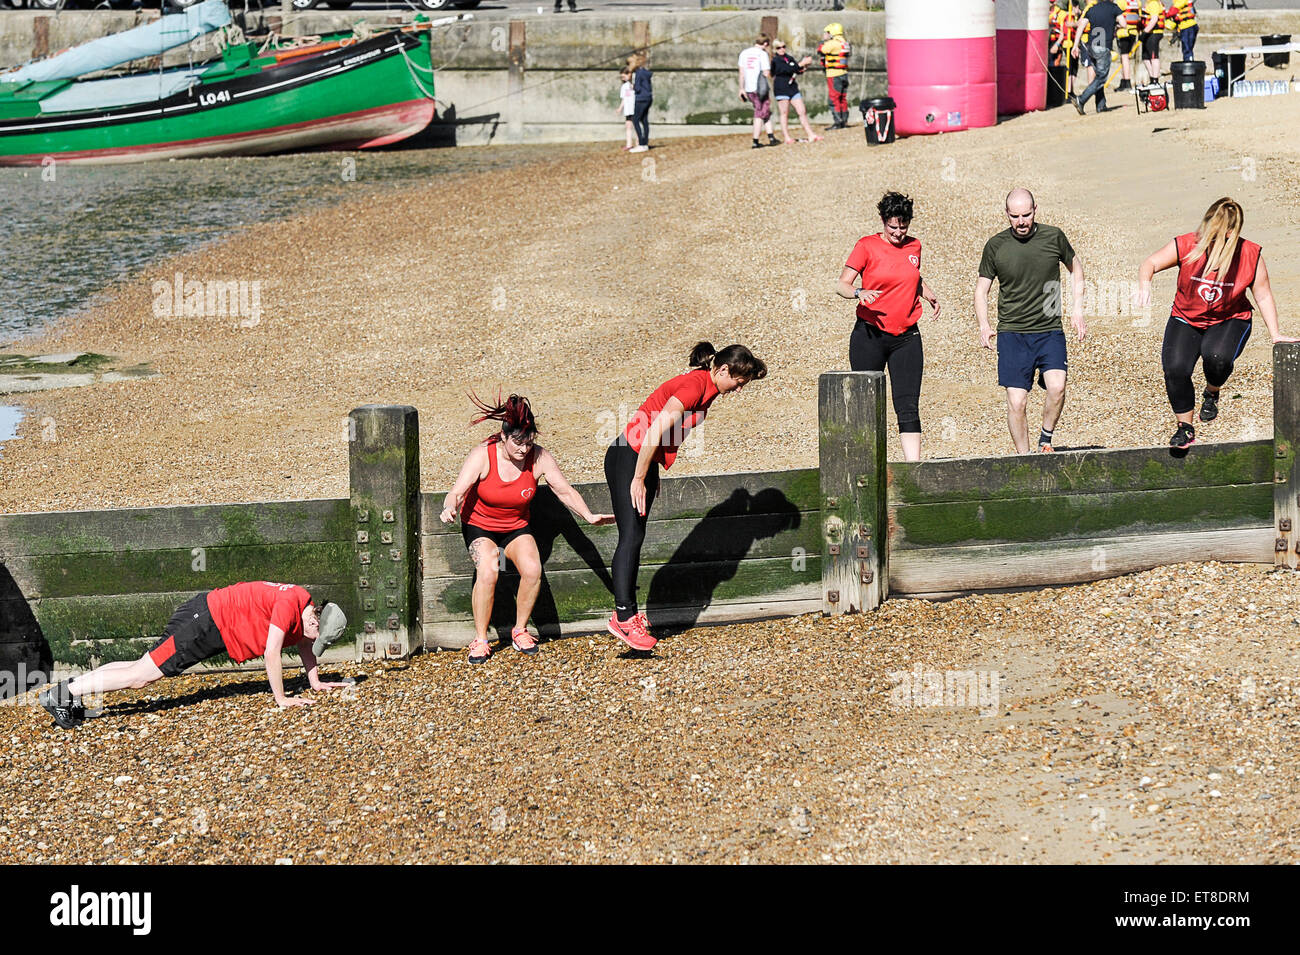 A fitness boot camp on the beach at leigh on Sea in Essex. Stock Photo